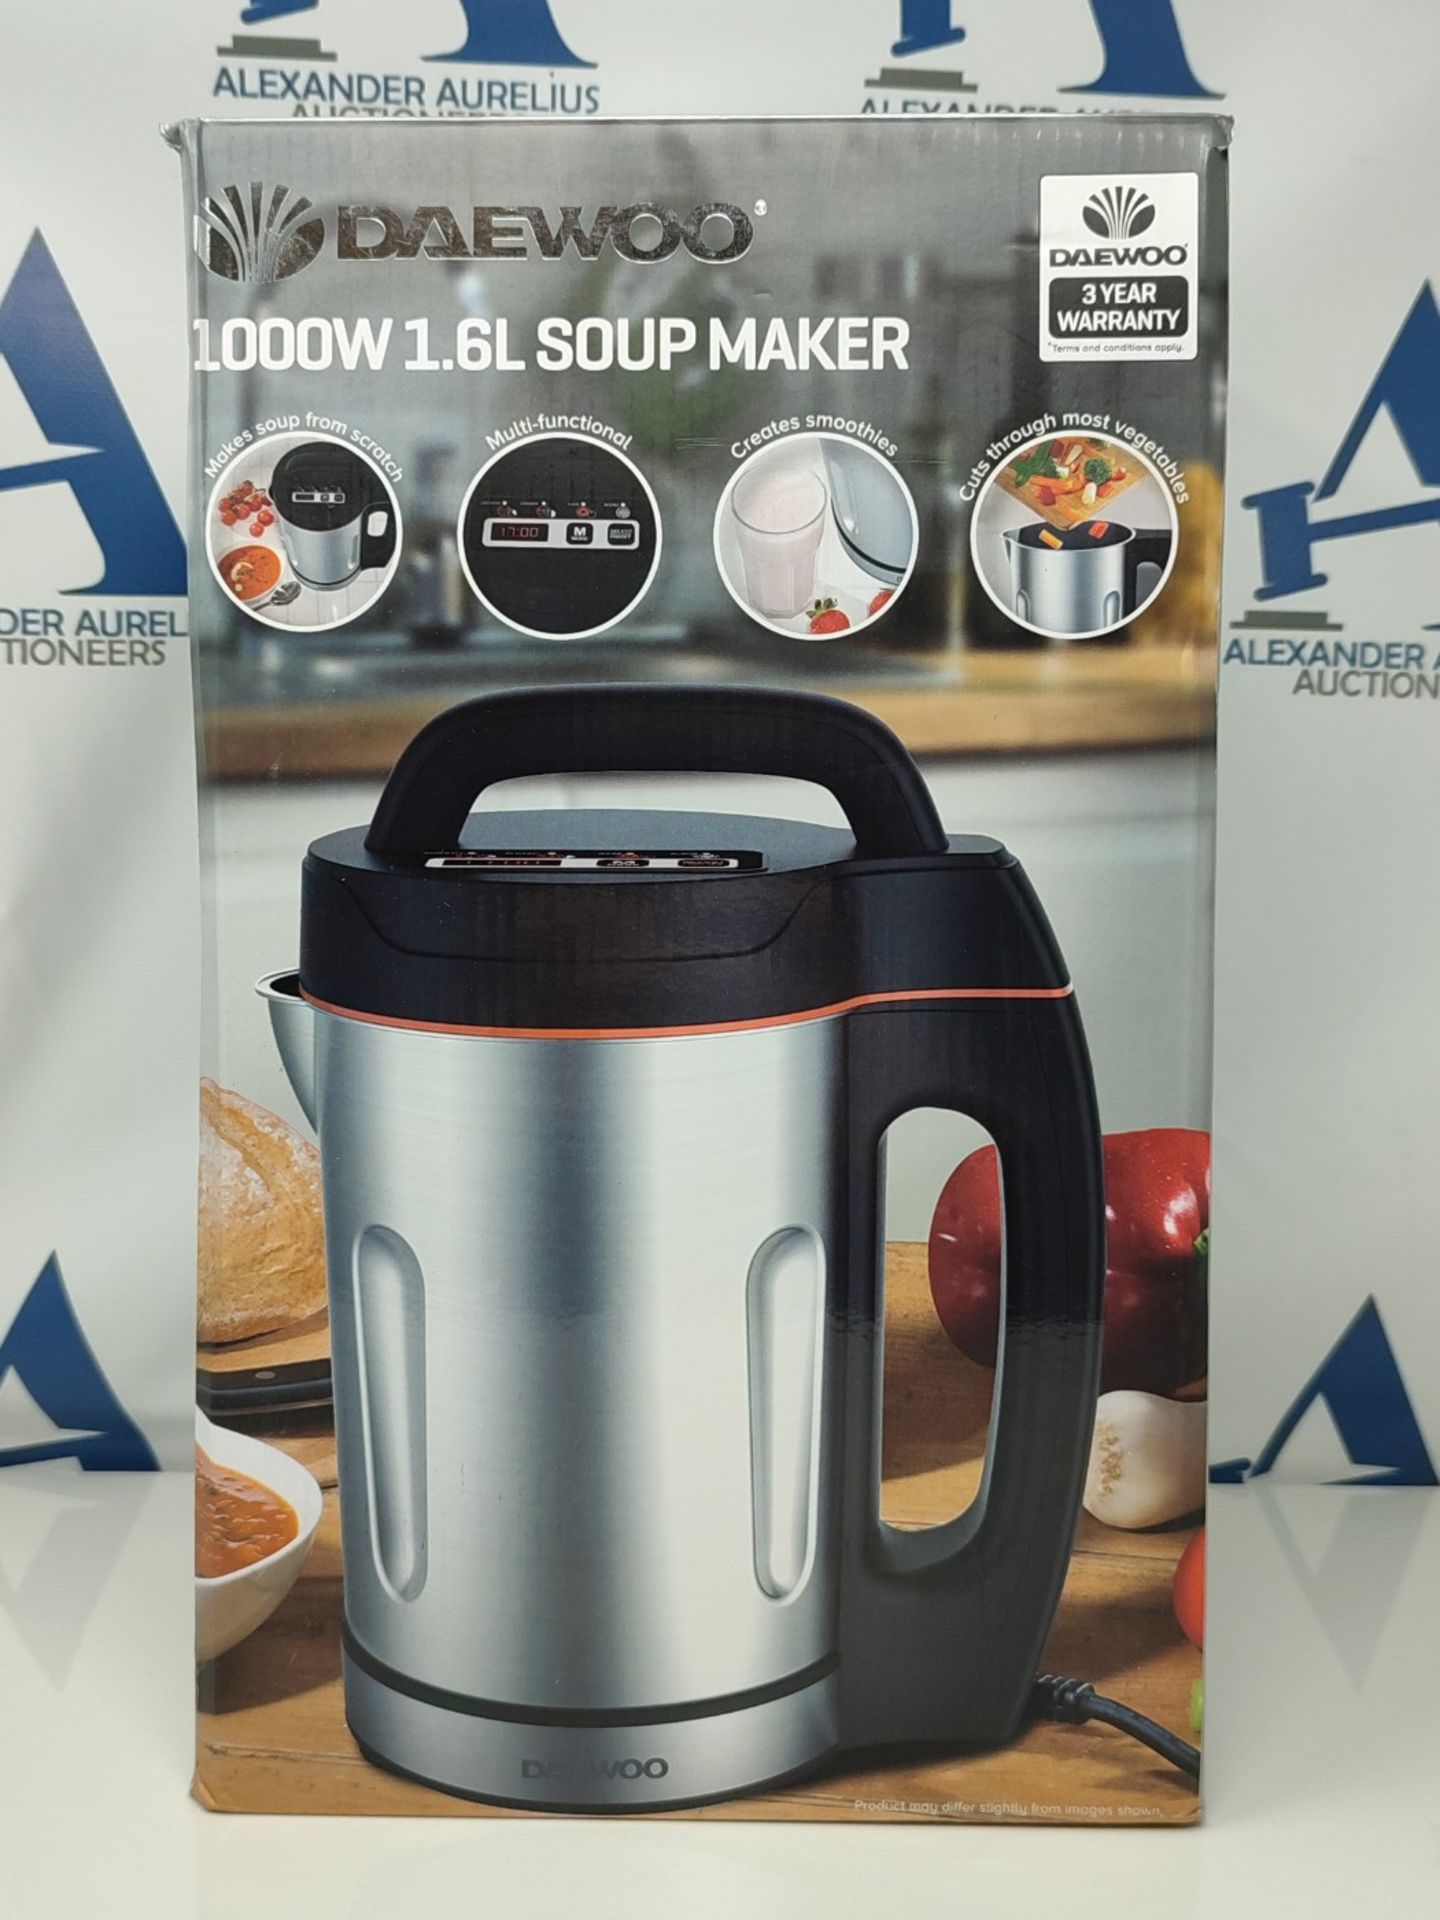 Daewoo SDA1714 Soup Maker | Usage-1000W | 1.6L Capacity | Ideal for Smooth & Chunky So - Image 2 of 3